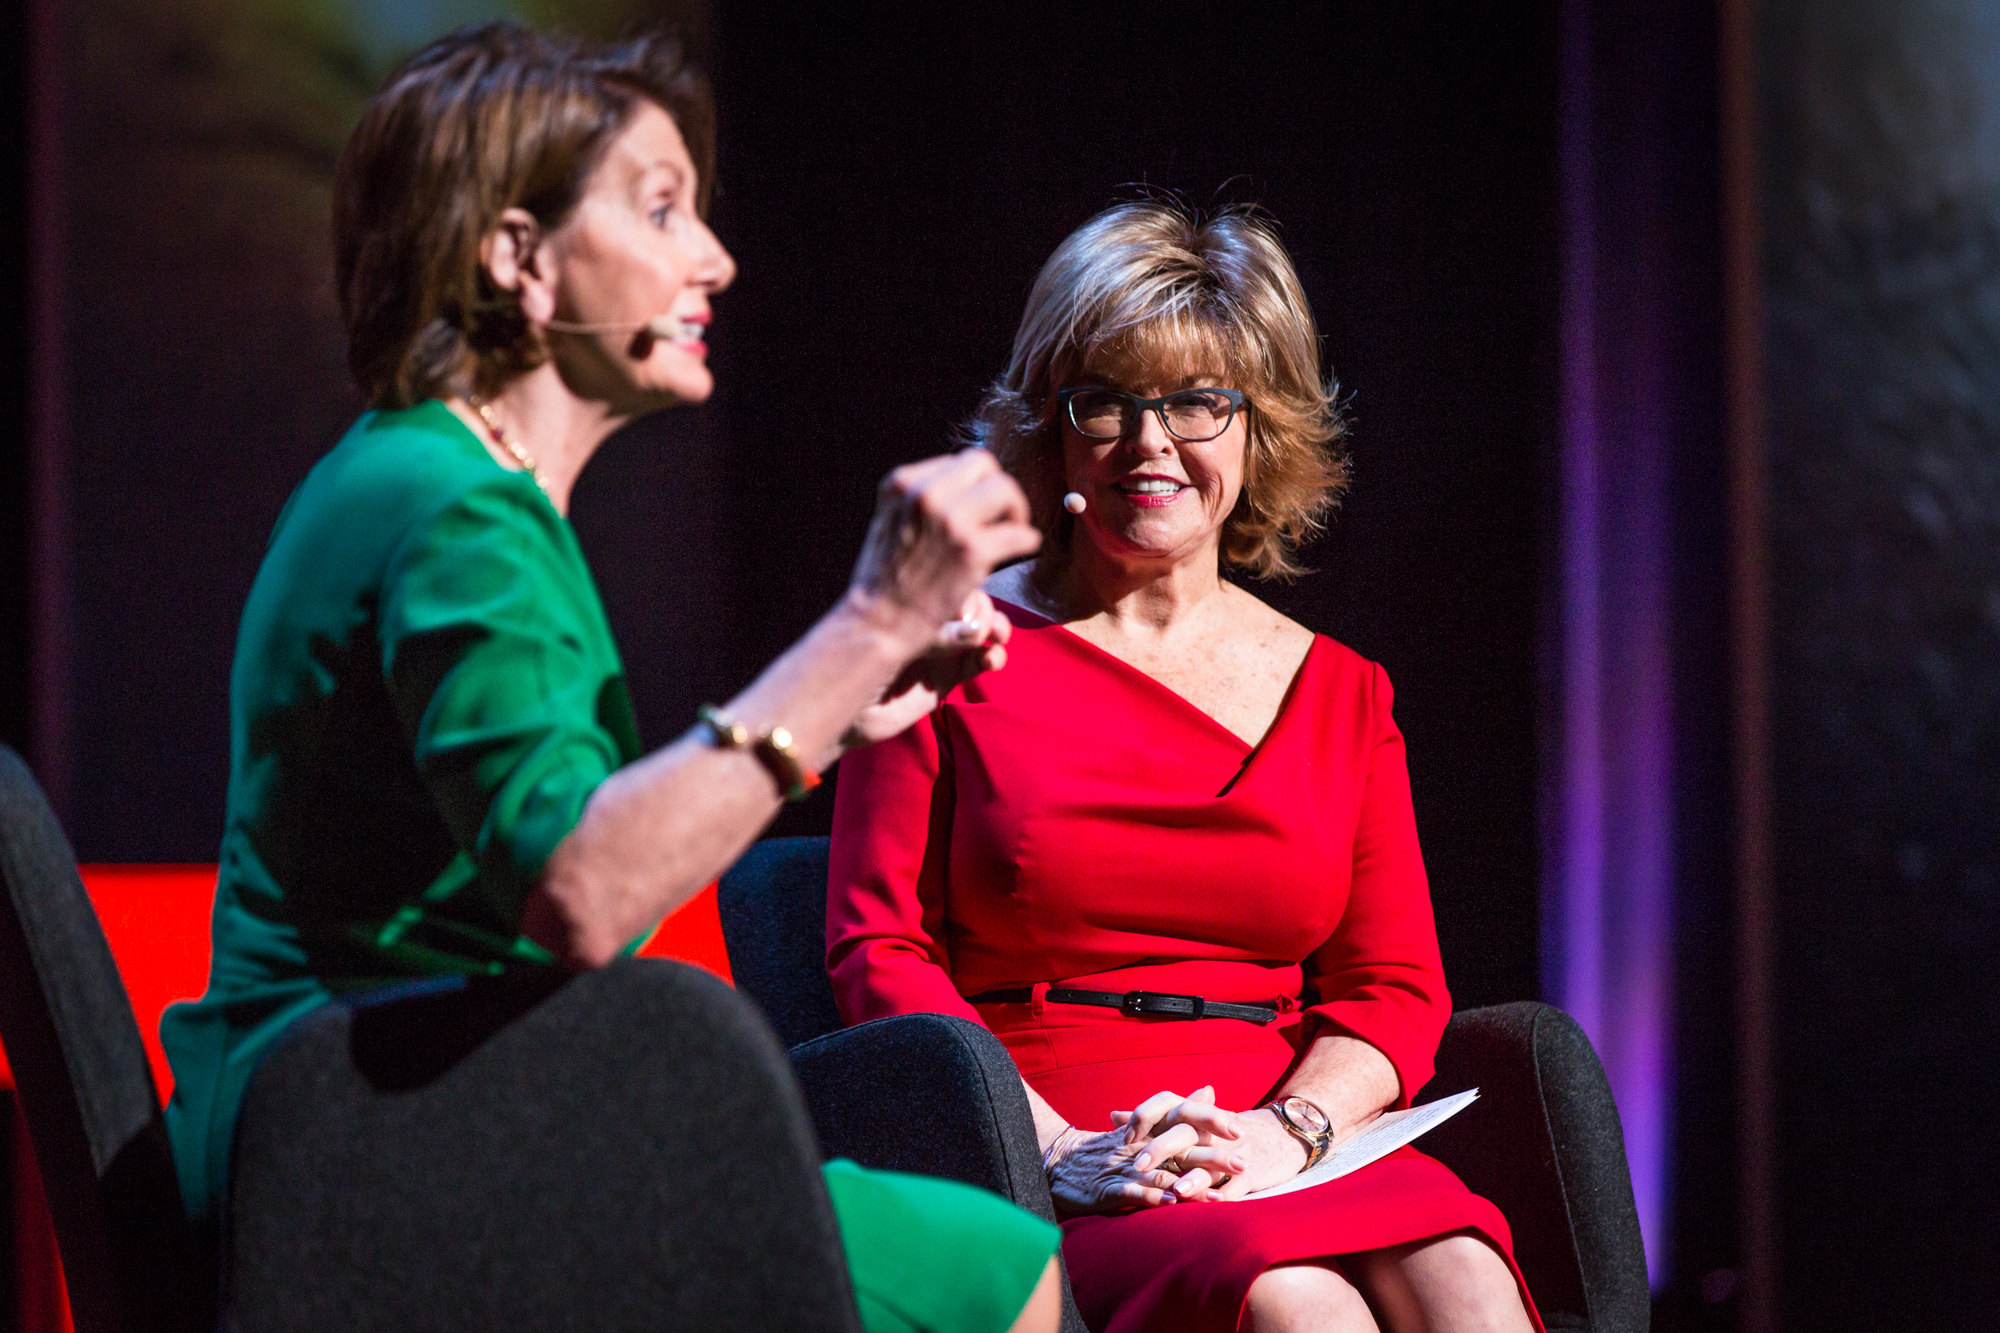 Nancy Pelosi with host Pat Mitchell at TEDWomen 2016 - It's About Time,  October 26-28, 2016, Yerba Buena Centre for the Arts, San Francisco, California. Photo: Marla  Aufmuth / TED